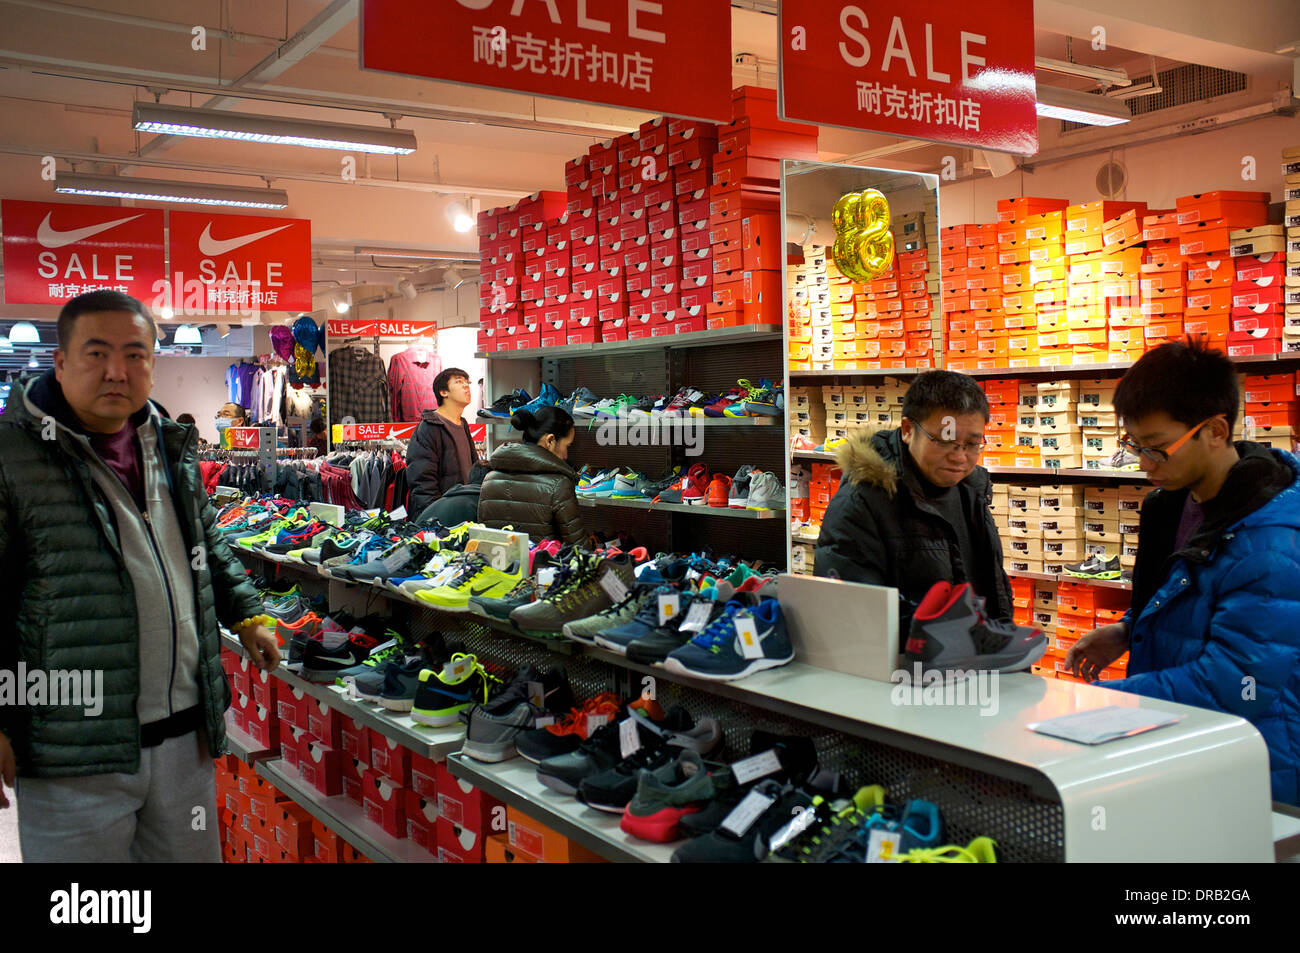 china nike outlet